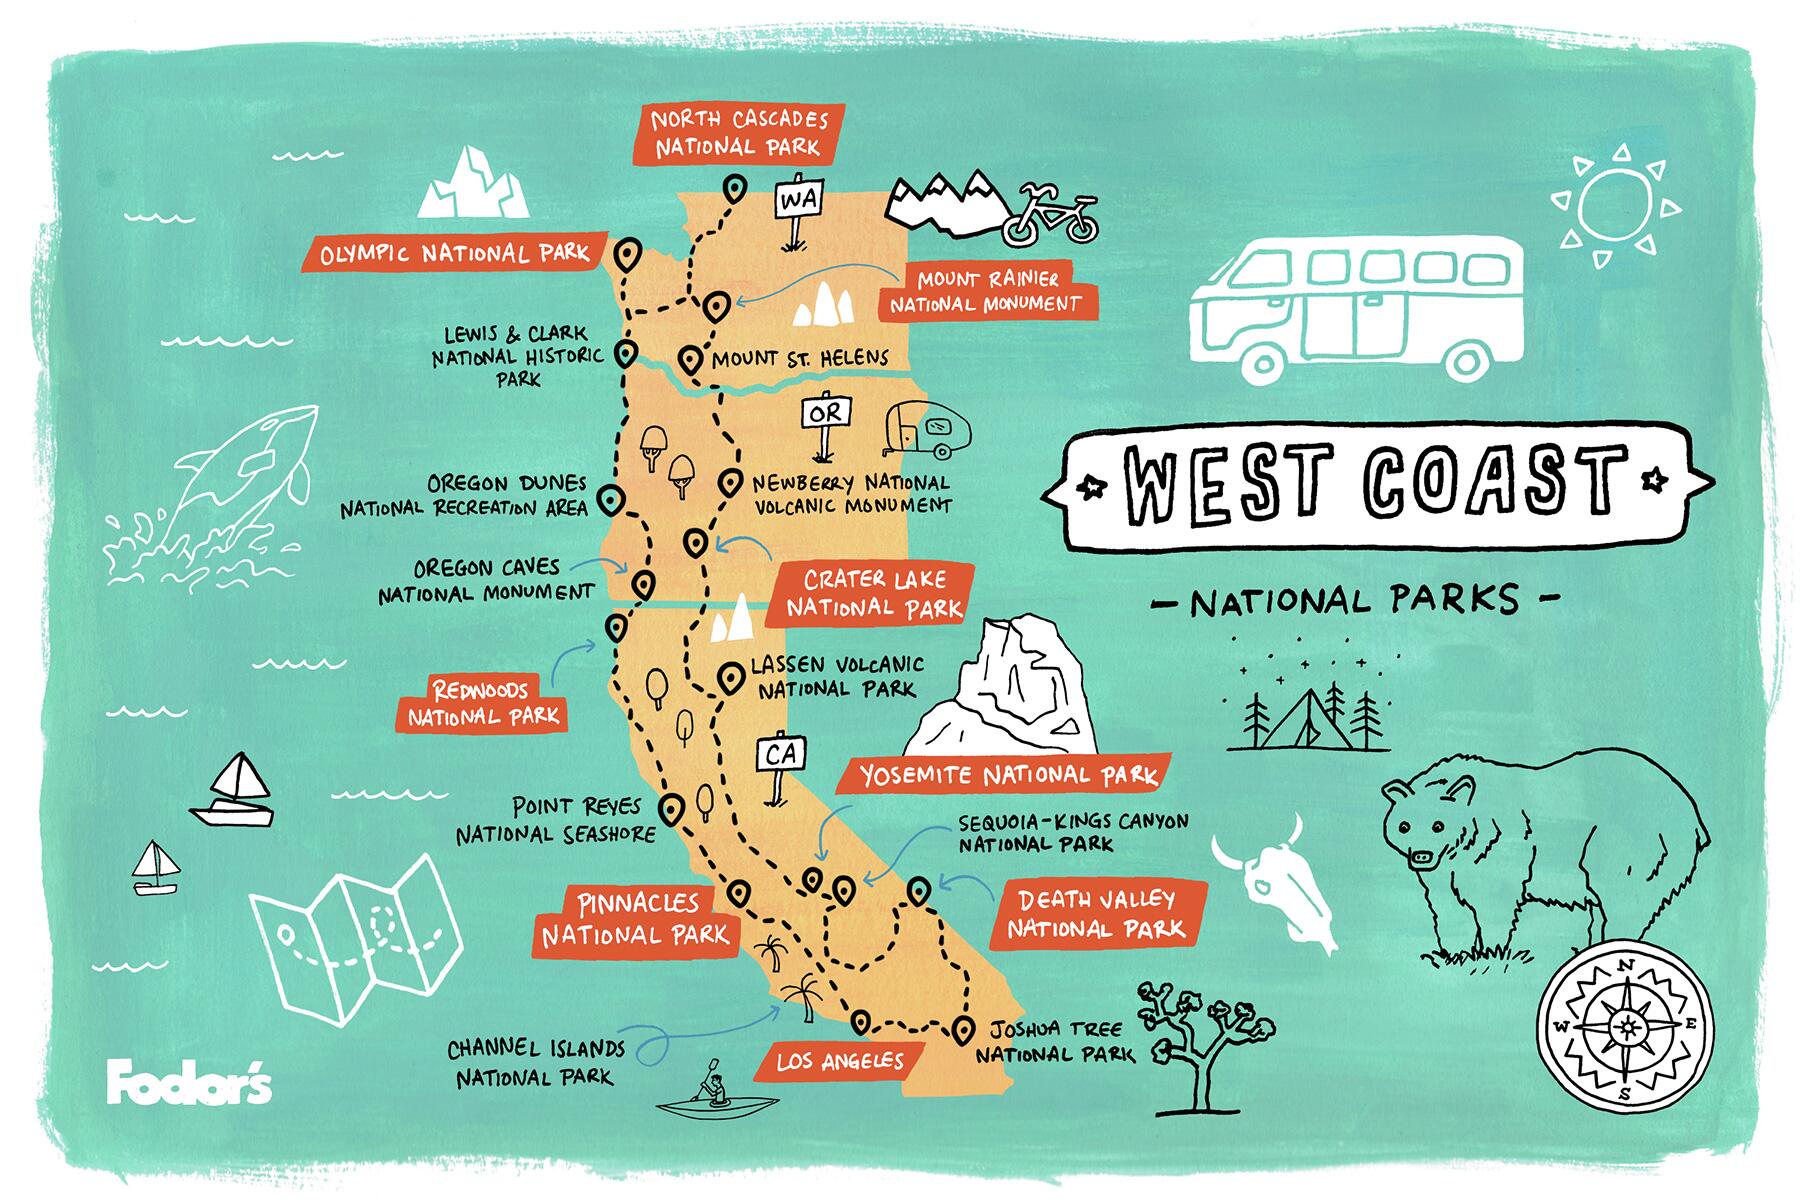 Road Trip Itinerary: The West Coast National Parks